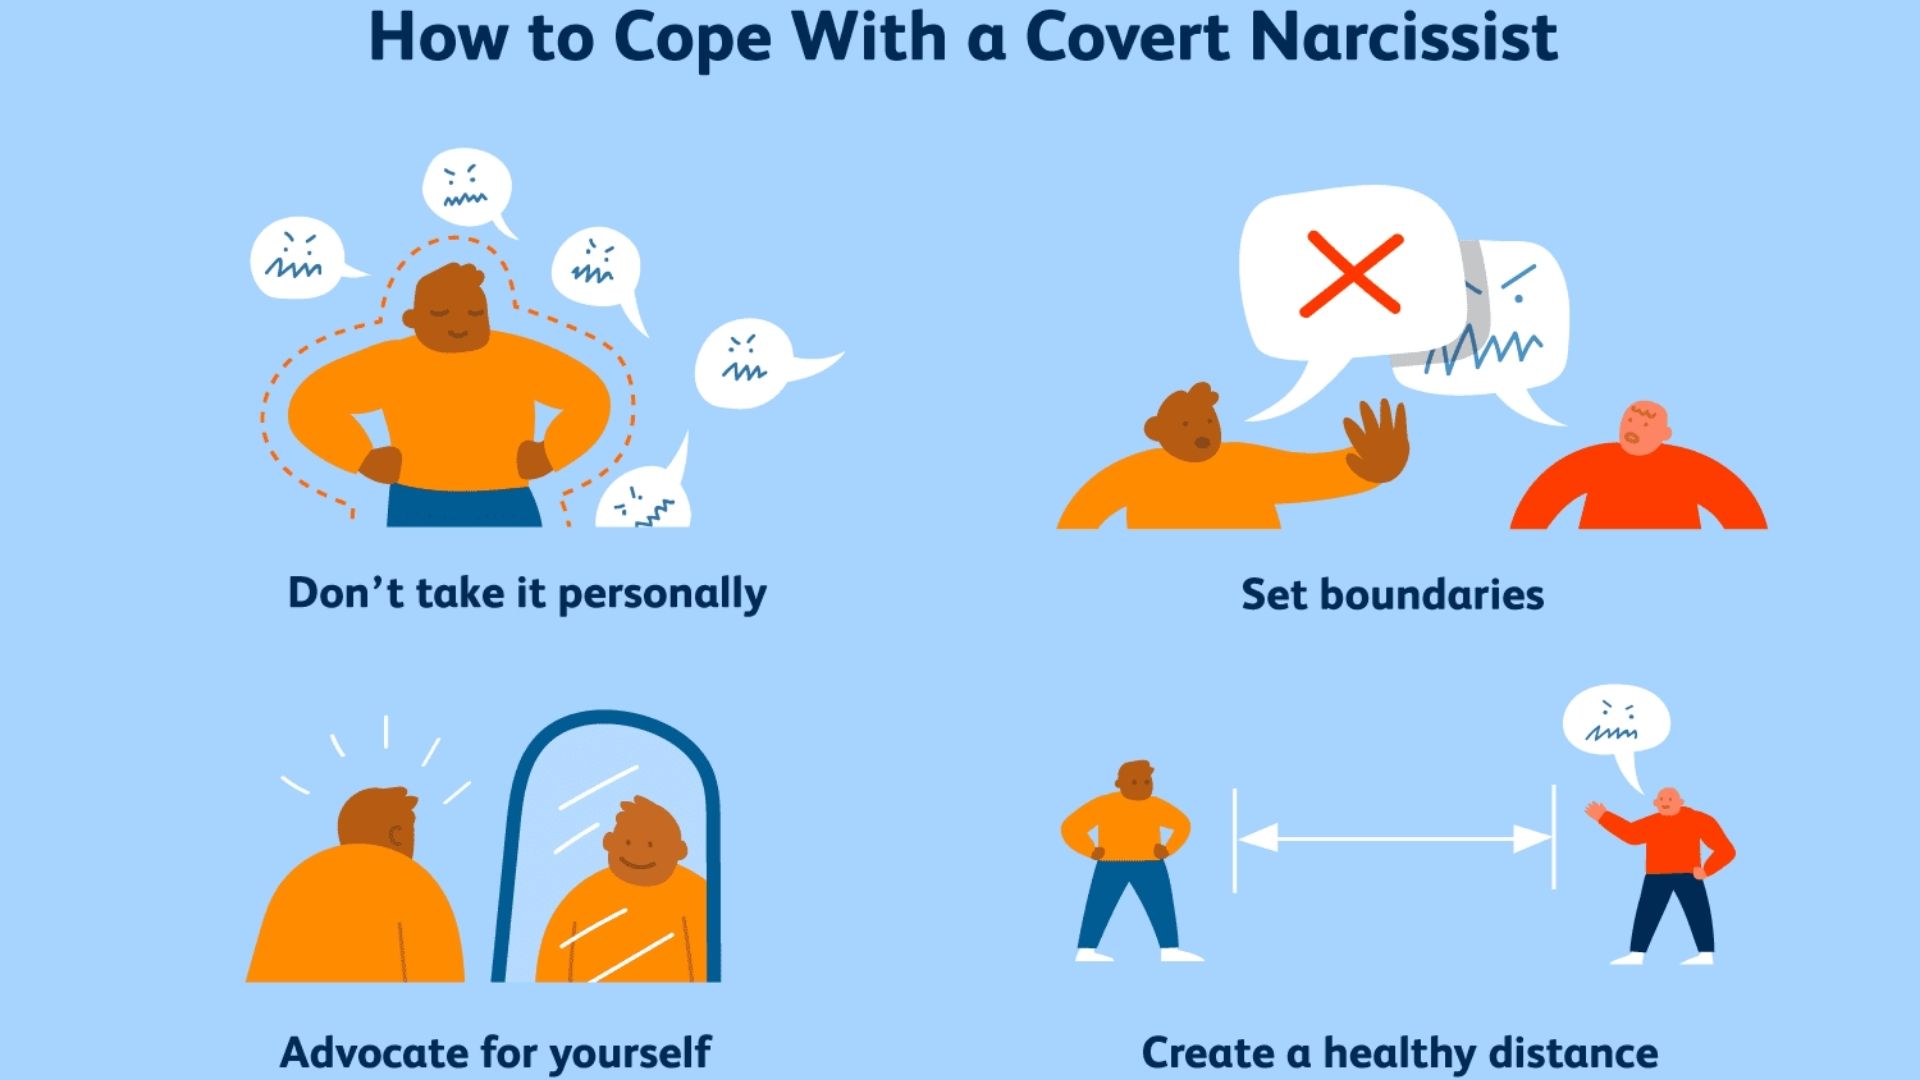 How To Deal With A Covert Narcissist?